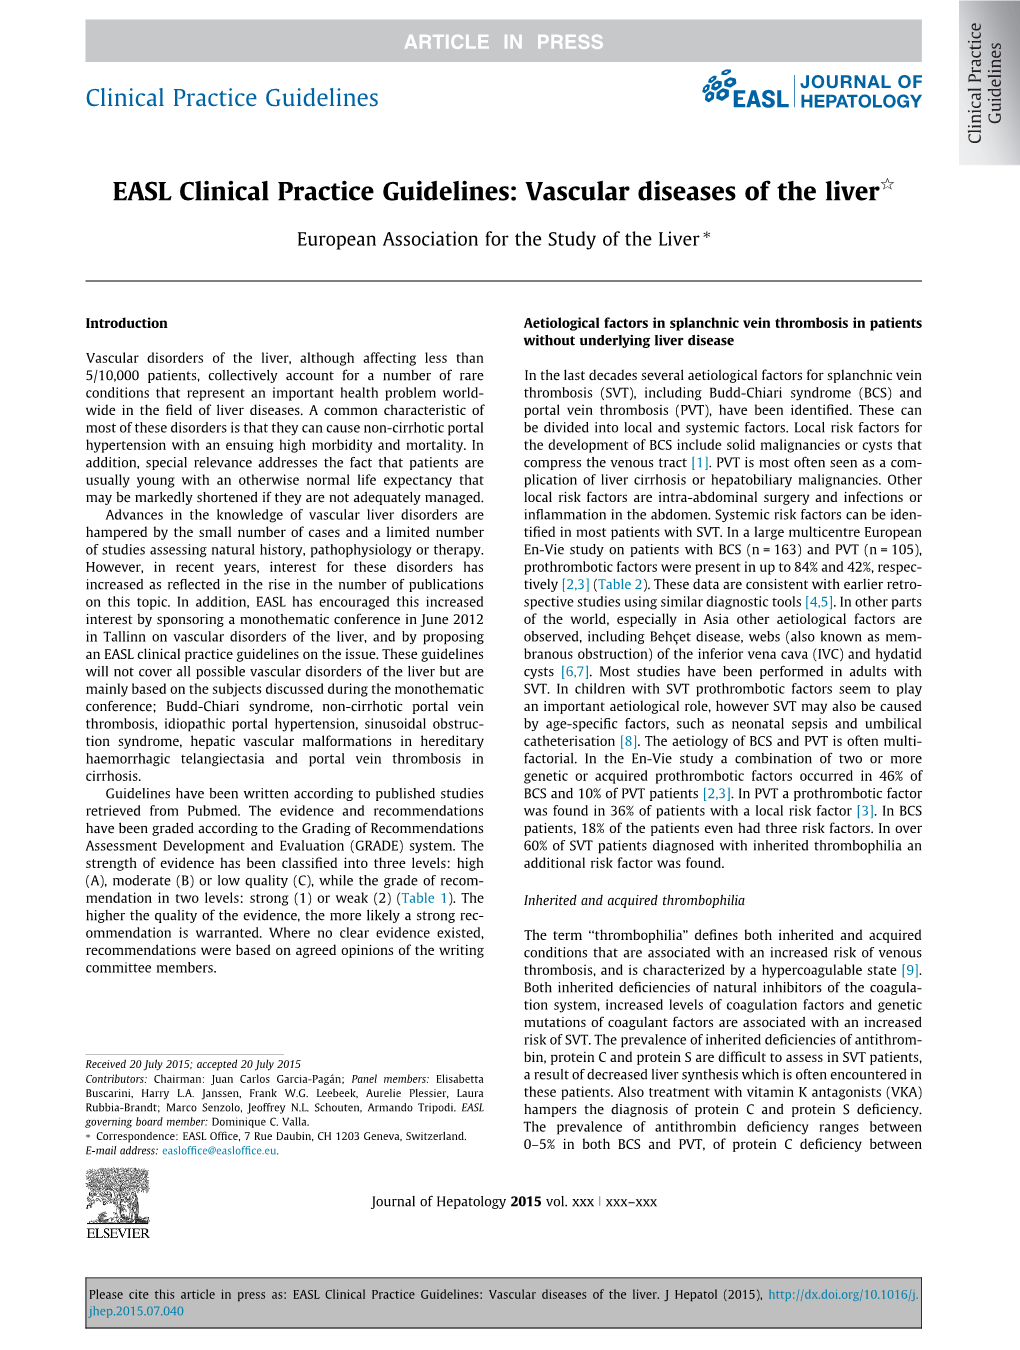 EASL Clinical Practice Guidelines: Vascular Diseases of the Liverq